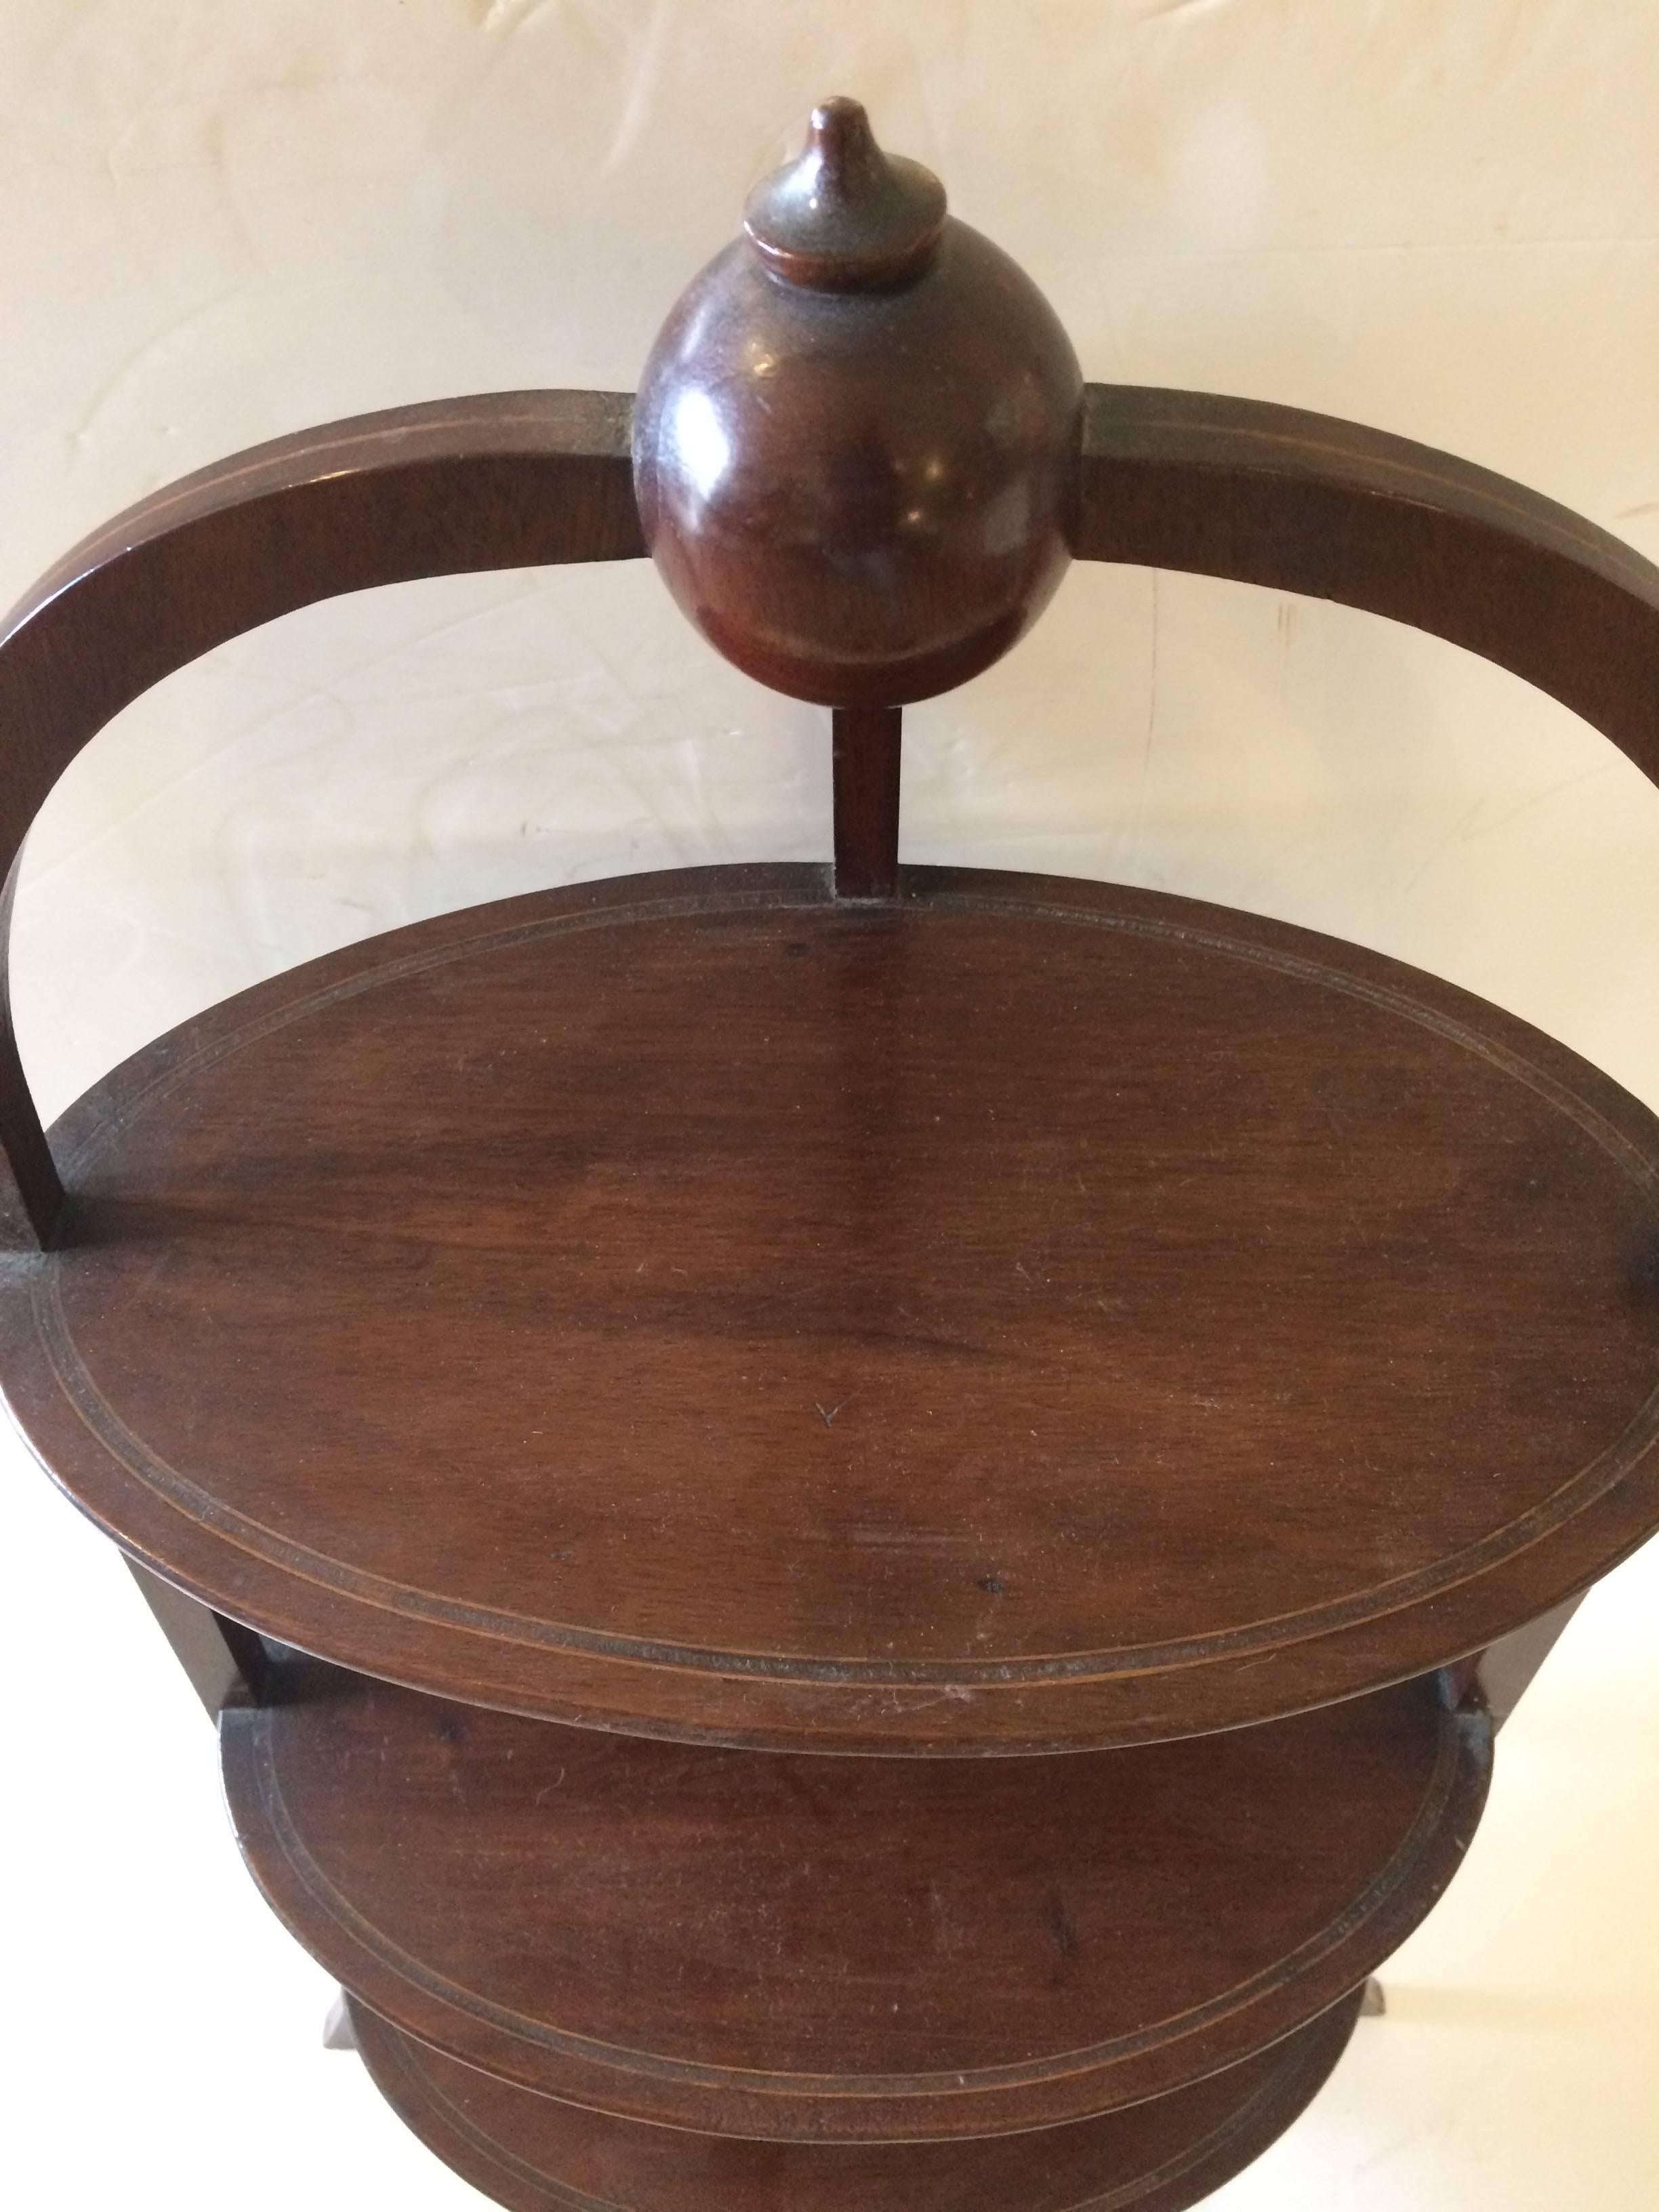 Gorgeous rare form muffin Stand or three-tier side table having three oval levels in mahogany with satinwood inlay and lovely curved legs, also with inlay on them vertically. Topped with a handsome ball. Distance between shelves is 10